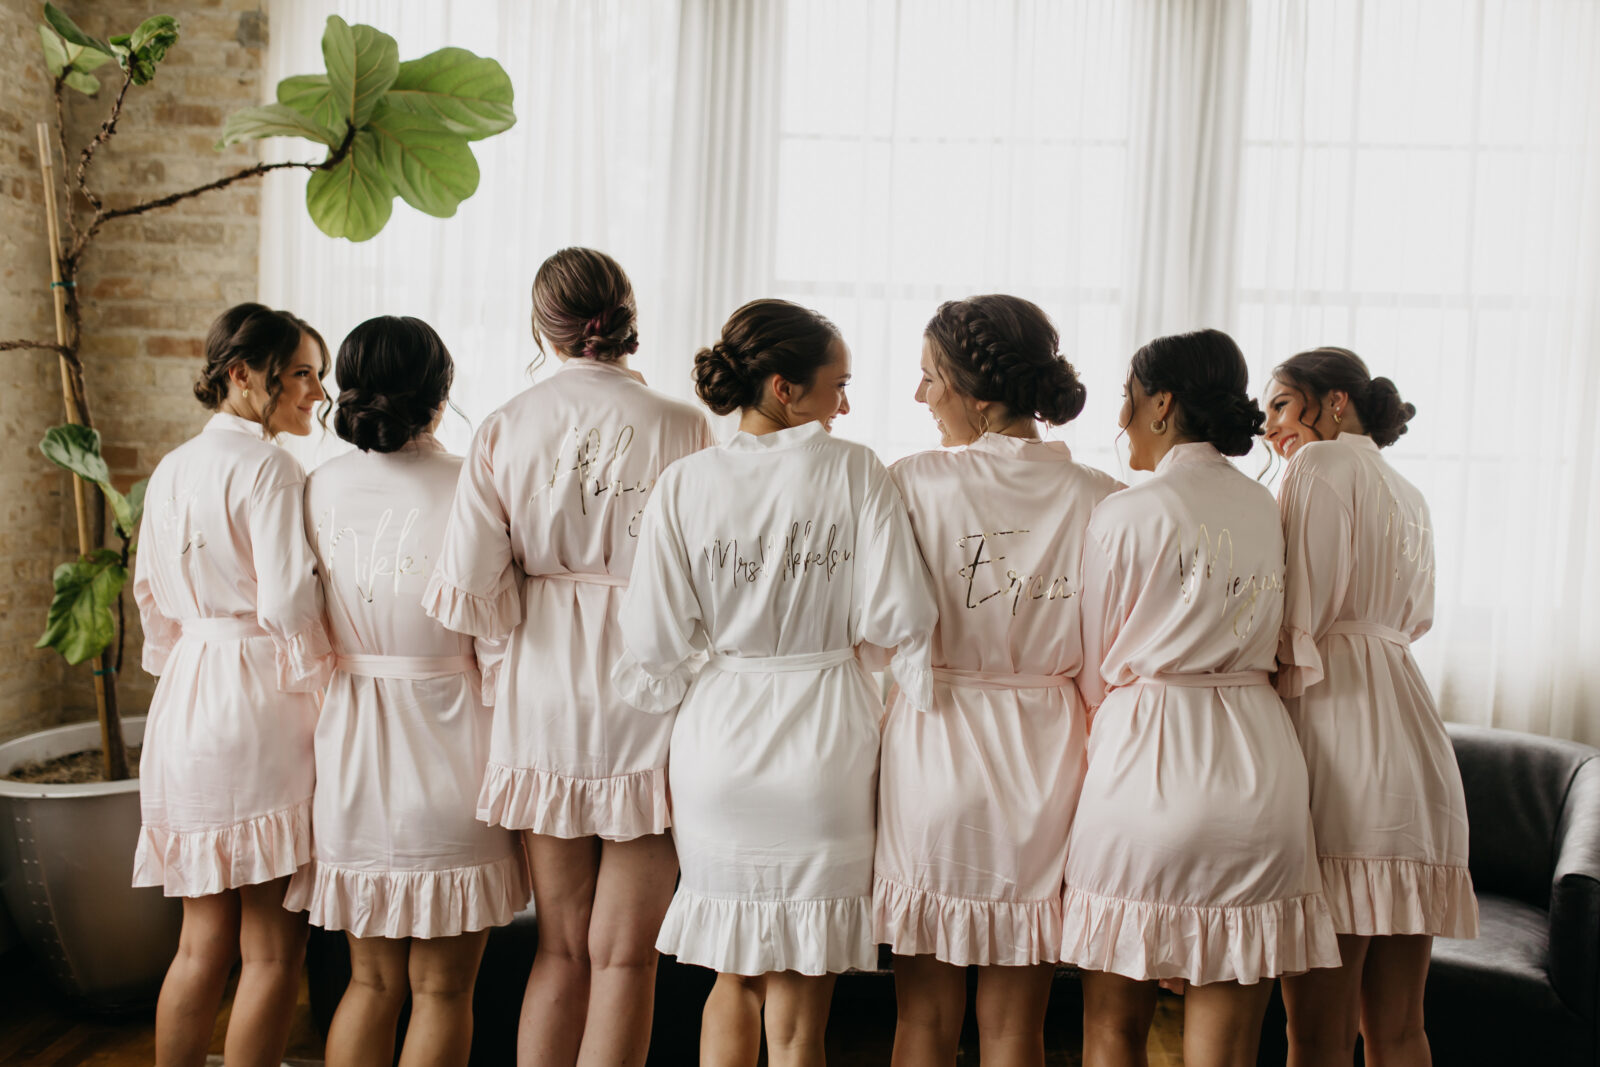 A photo of the bride and her bridesmaids wile preparing for the wedding day